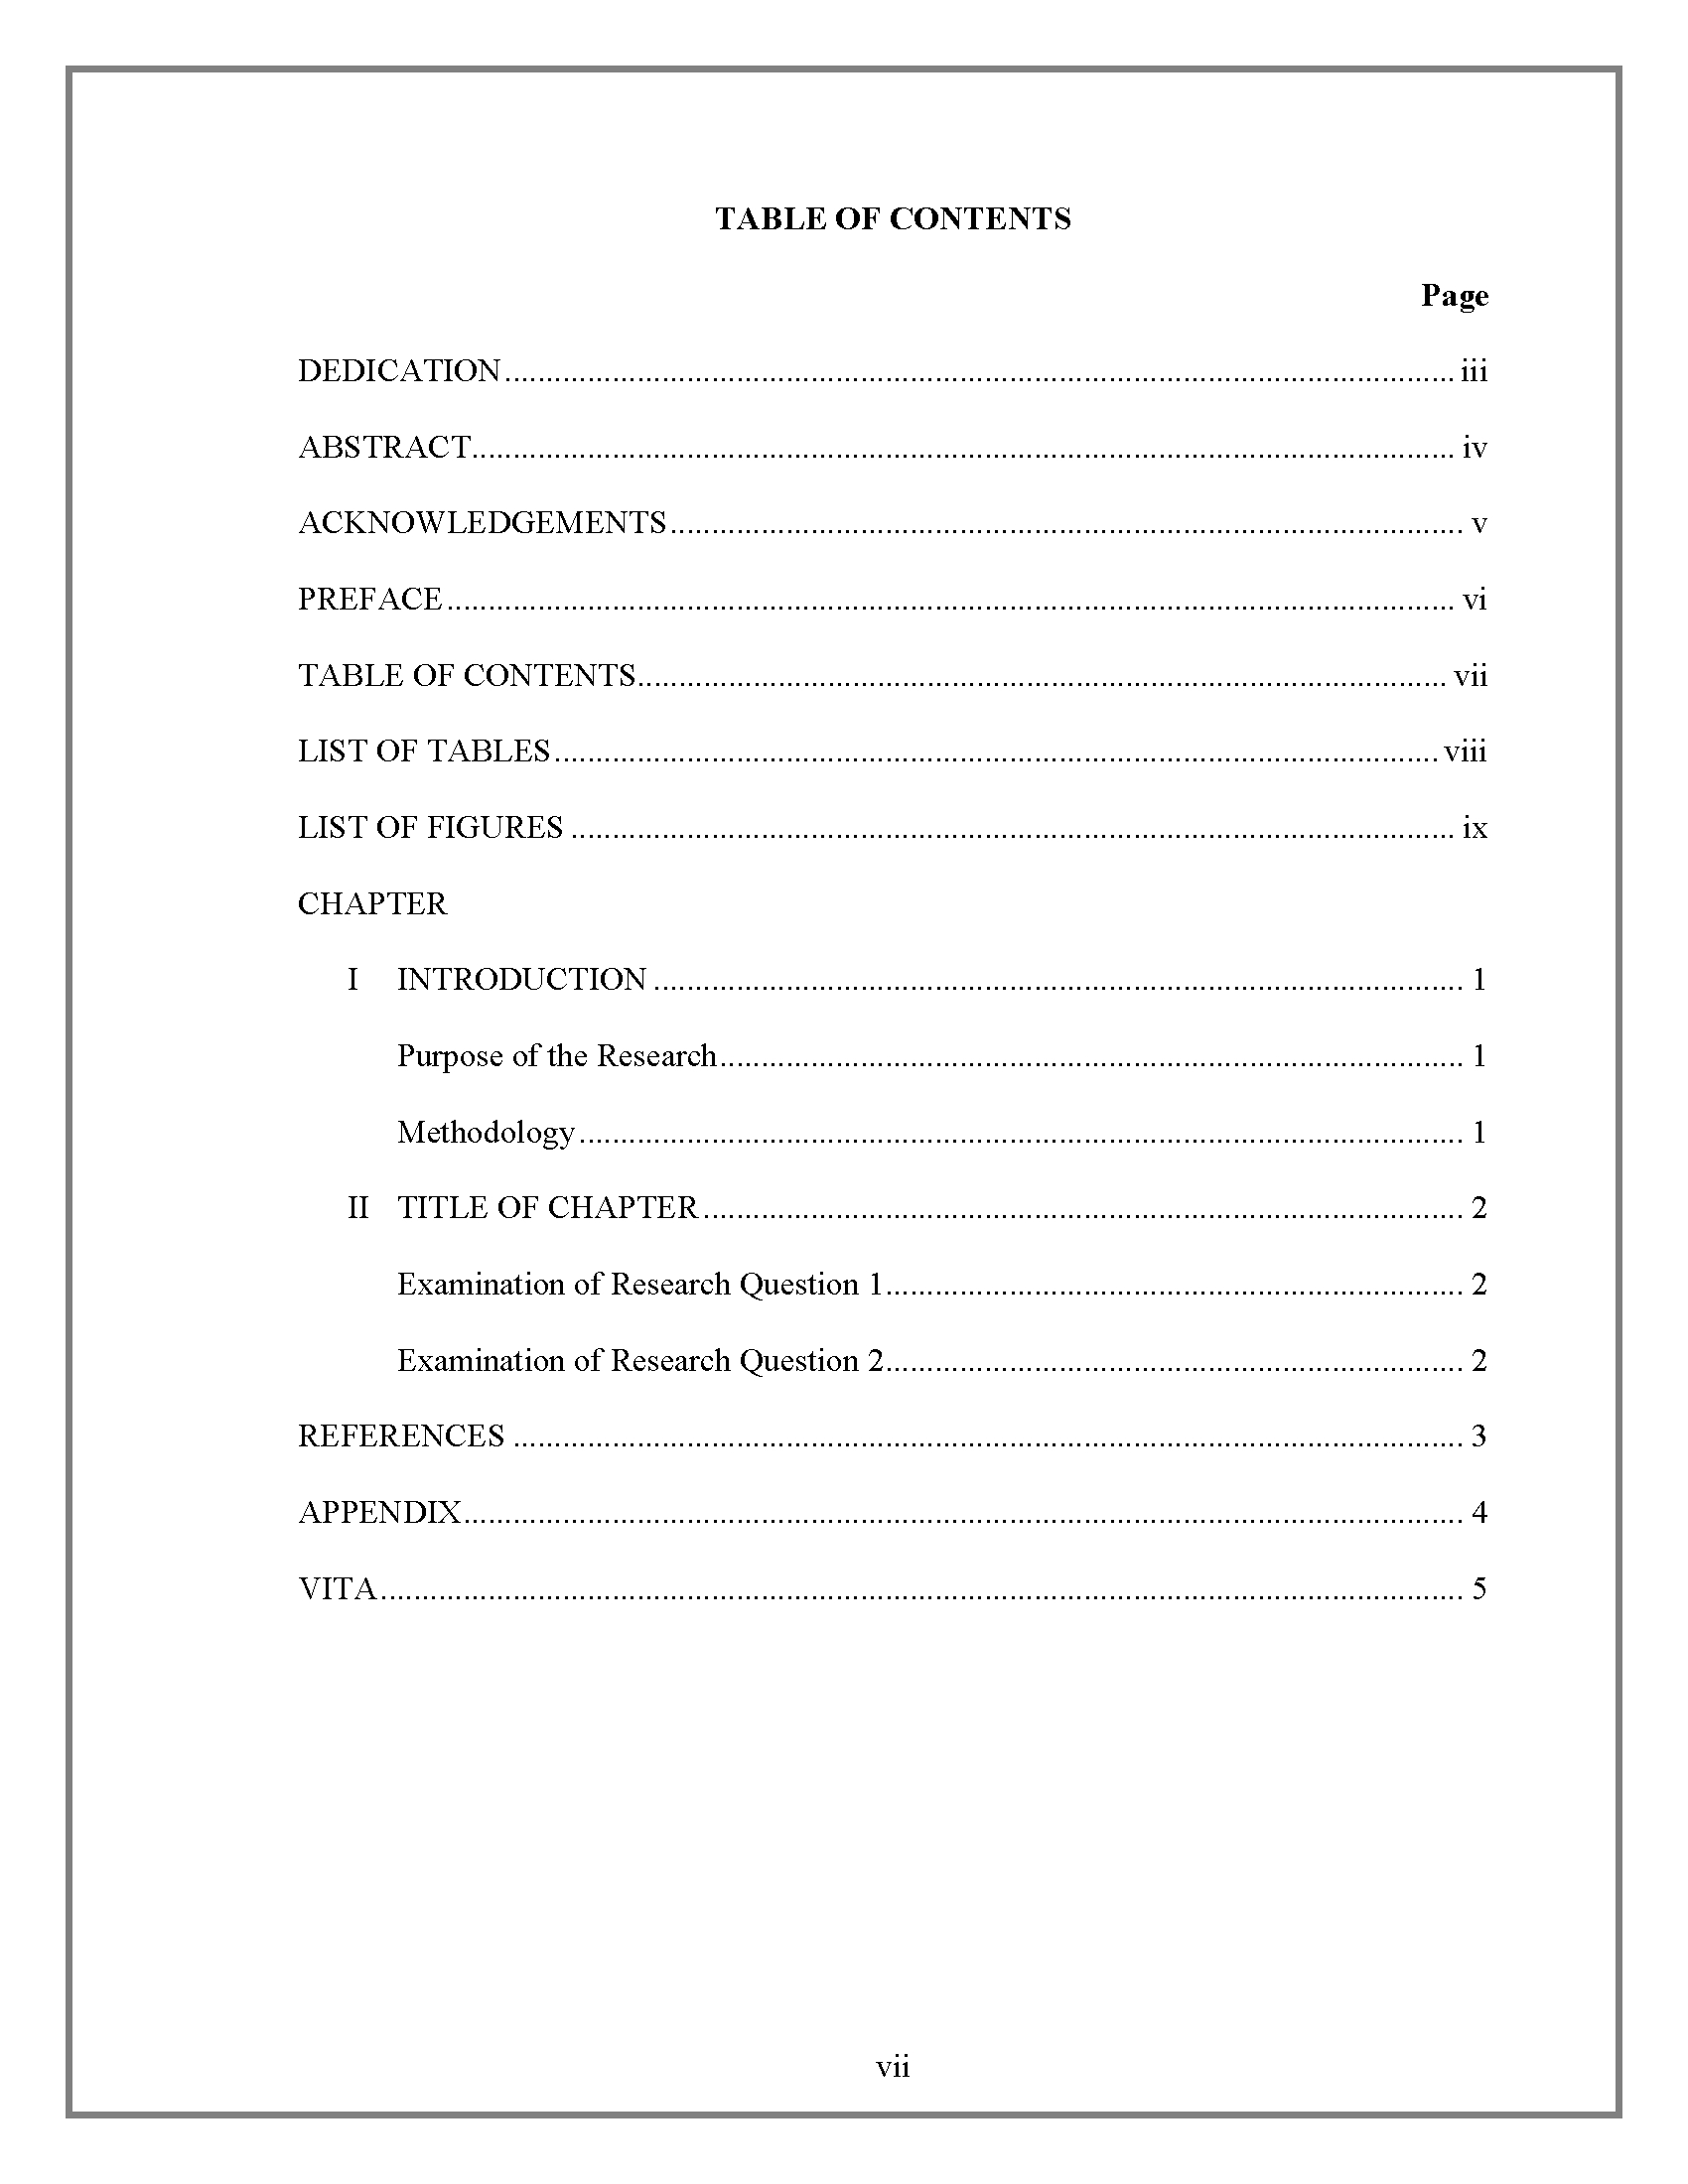 Table Of Contents - Thesis And Dissertation - Research Throughout Report Content Page Template